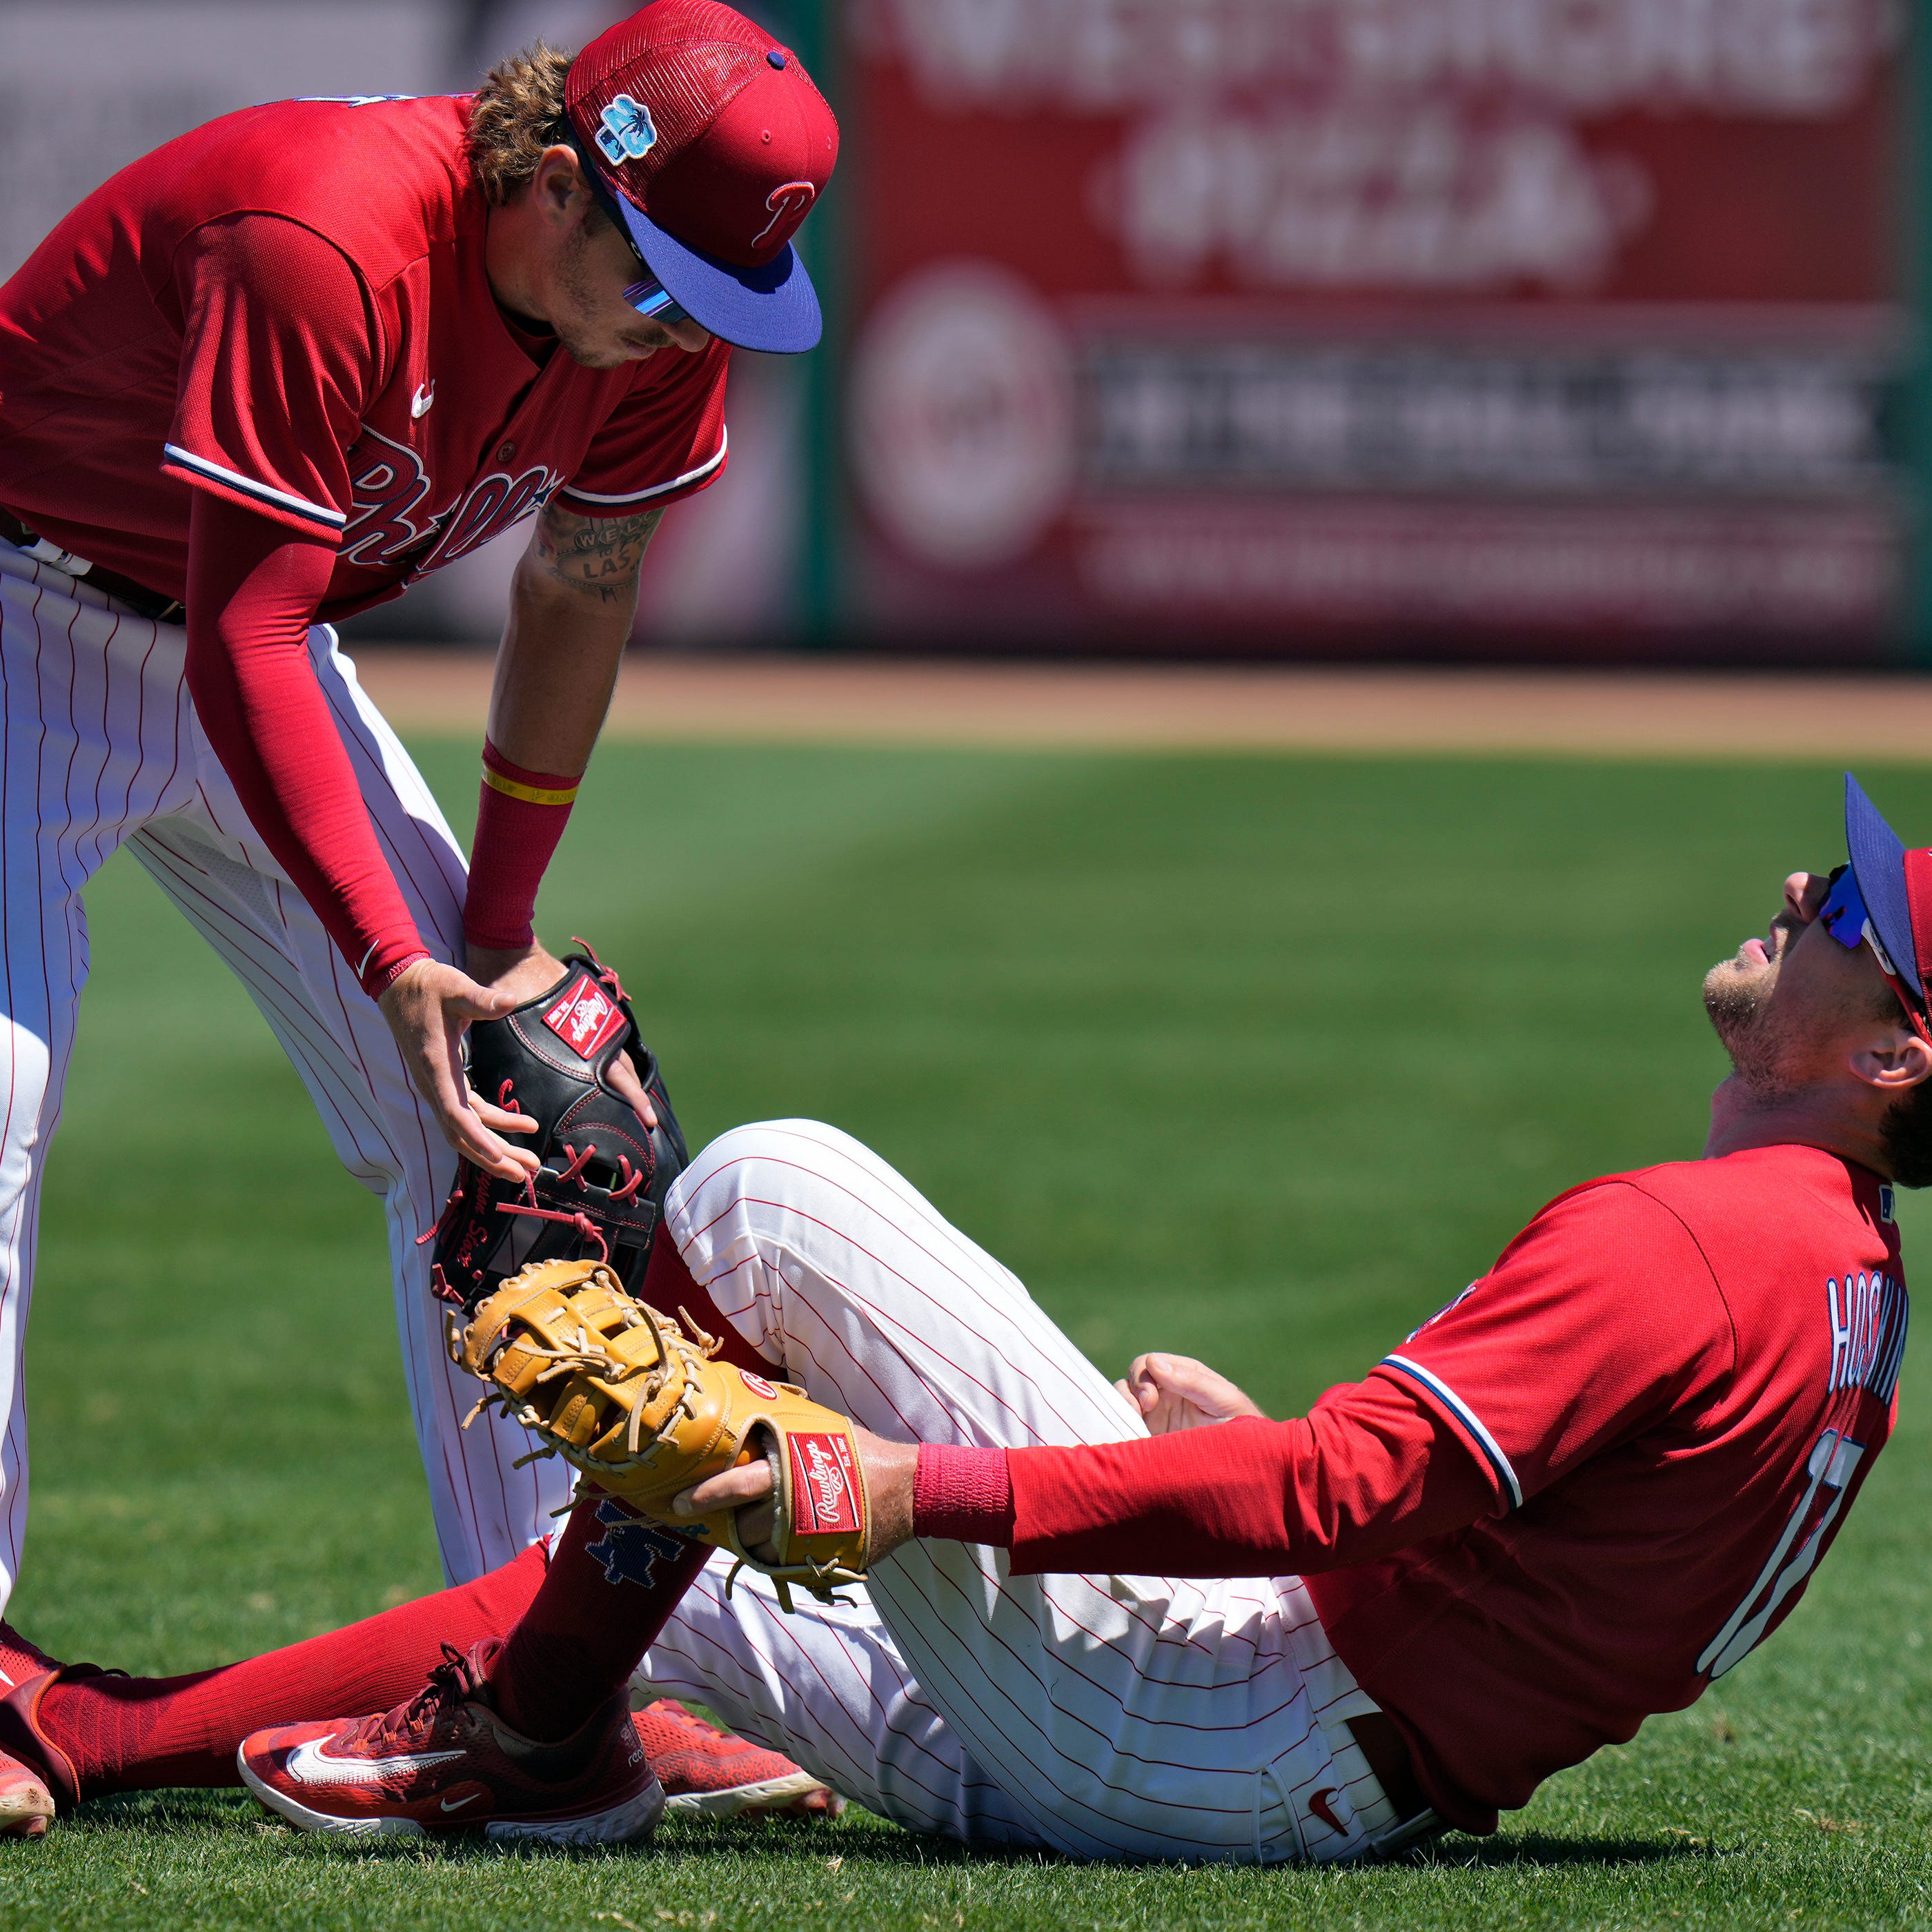 Philadelphia Phillies first baseman Rhys Hoskins (17) falls backwards after hurting his leg fielding a ground ball by Detroit Tigers' Austin Meadows during the second inning of a spring training baseball game Thursday, March 23, 2023, in Clearwater, Fla.